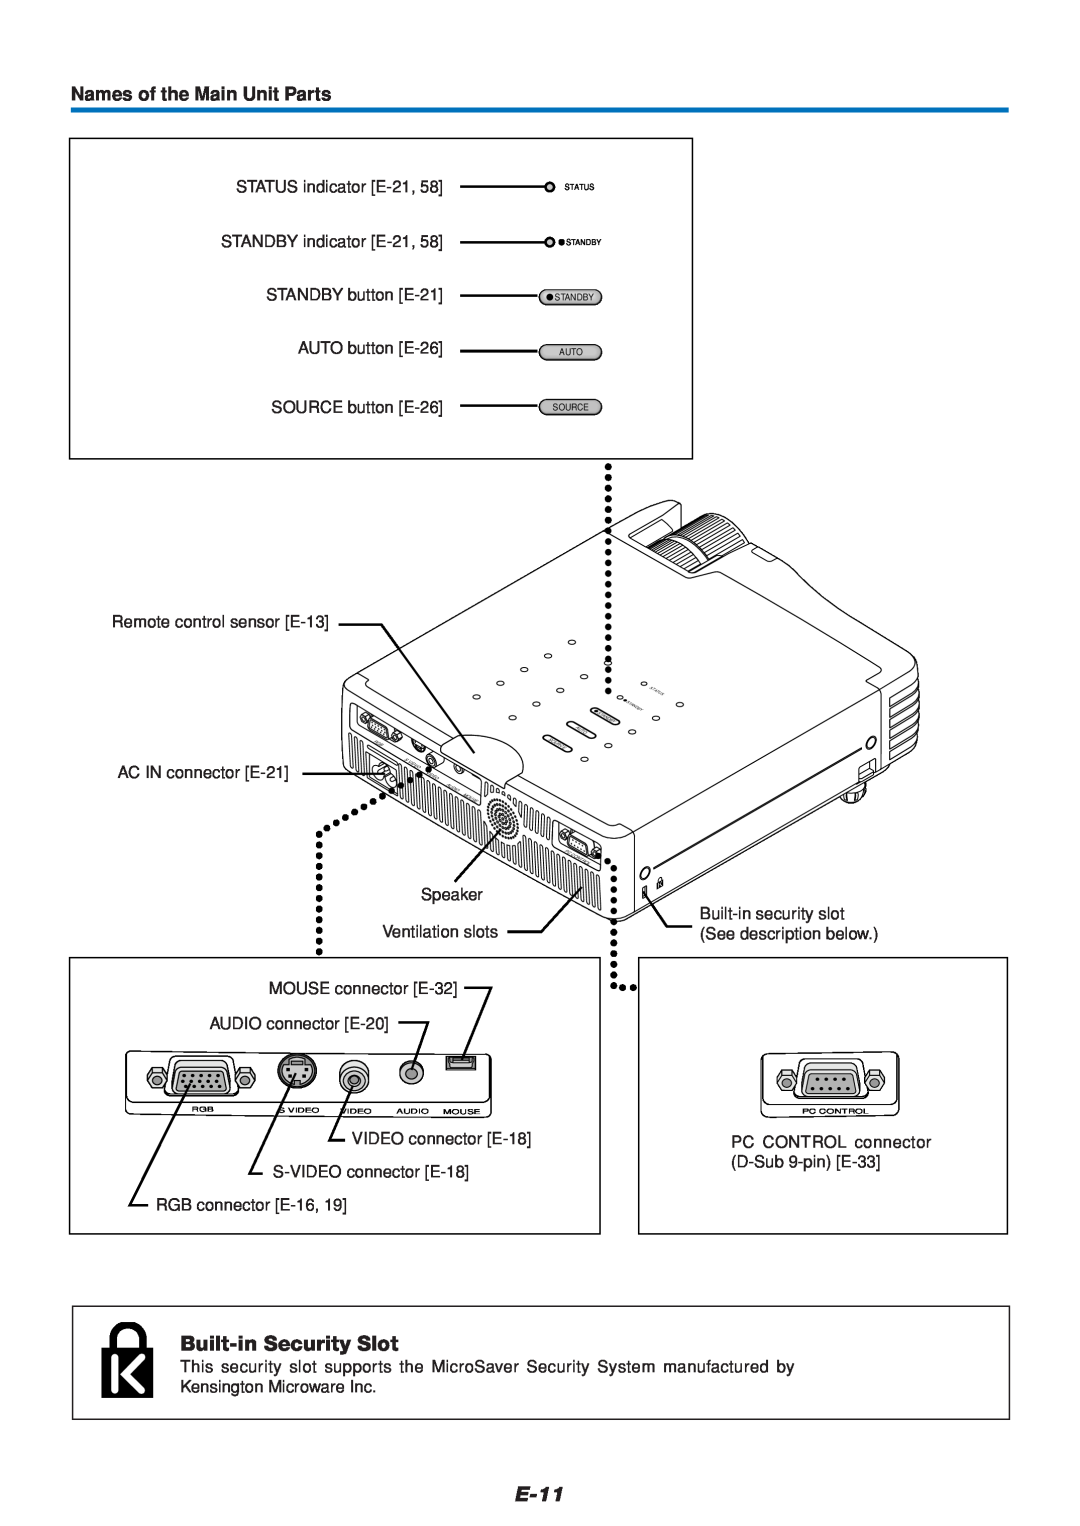 Mitsubishi Electronics DATA PROJECTOR user manual Built-in Security Slot, E-11, Names of the Main Unit Parts 